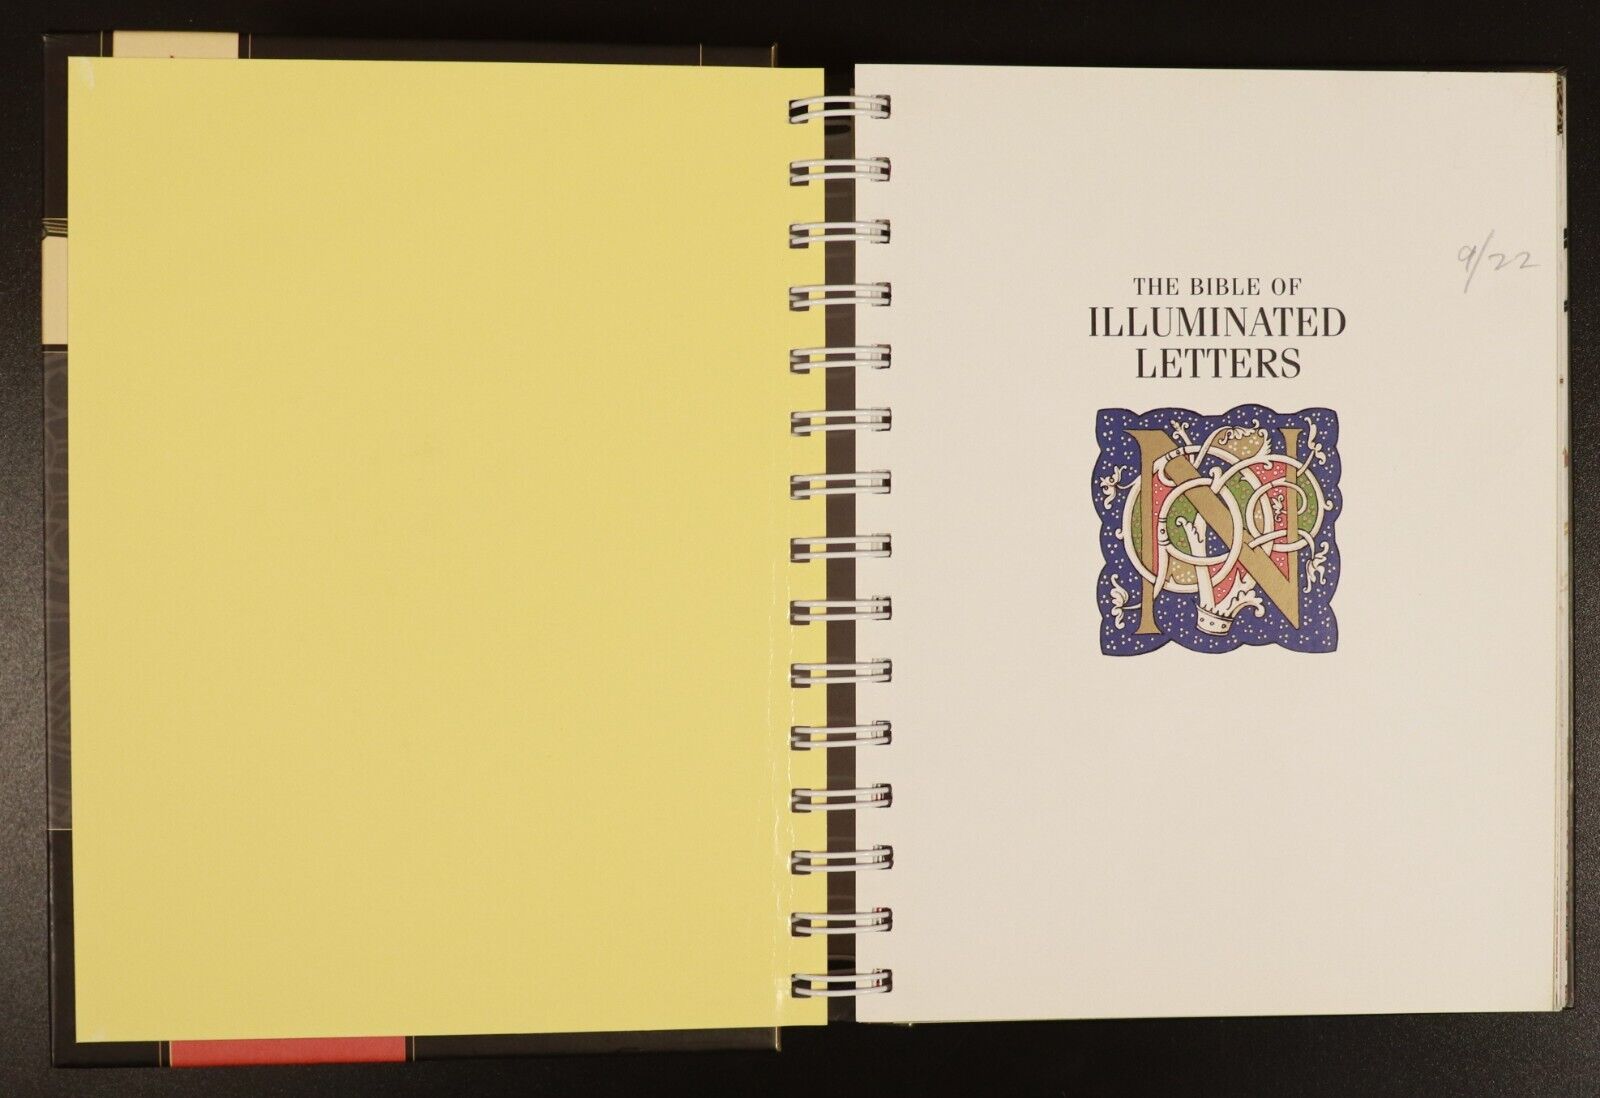 2006 The Bible Of Illuminated Letters Calligraphy Reference Book M. Morgan